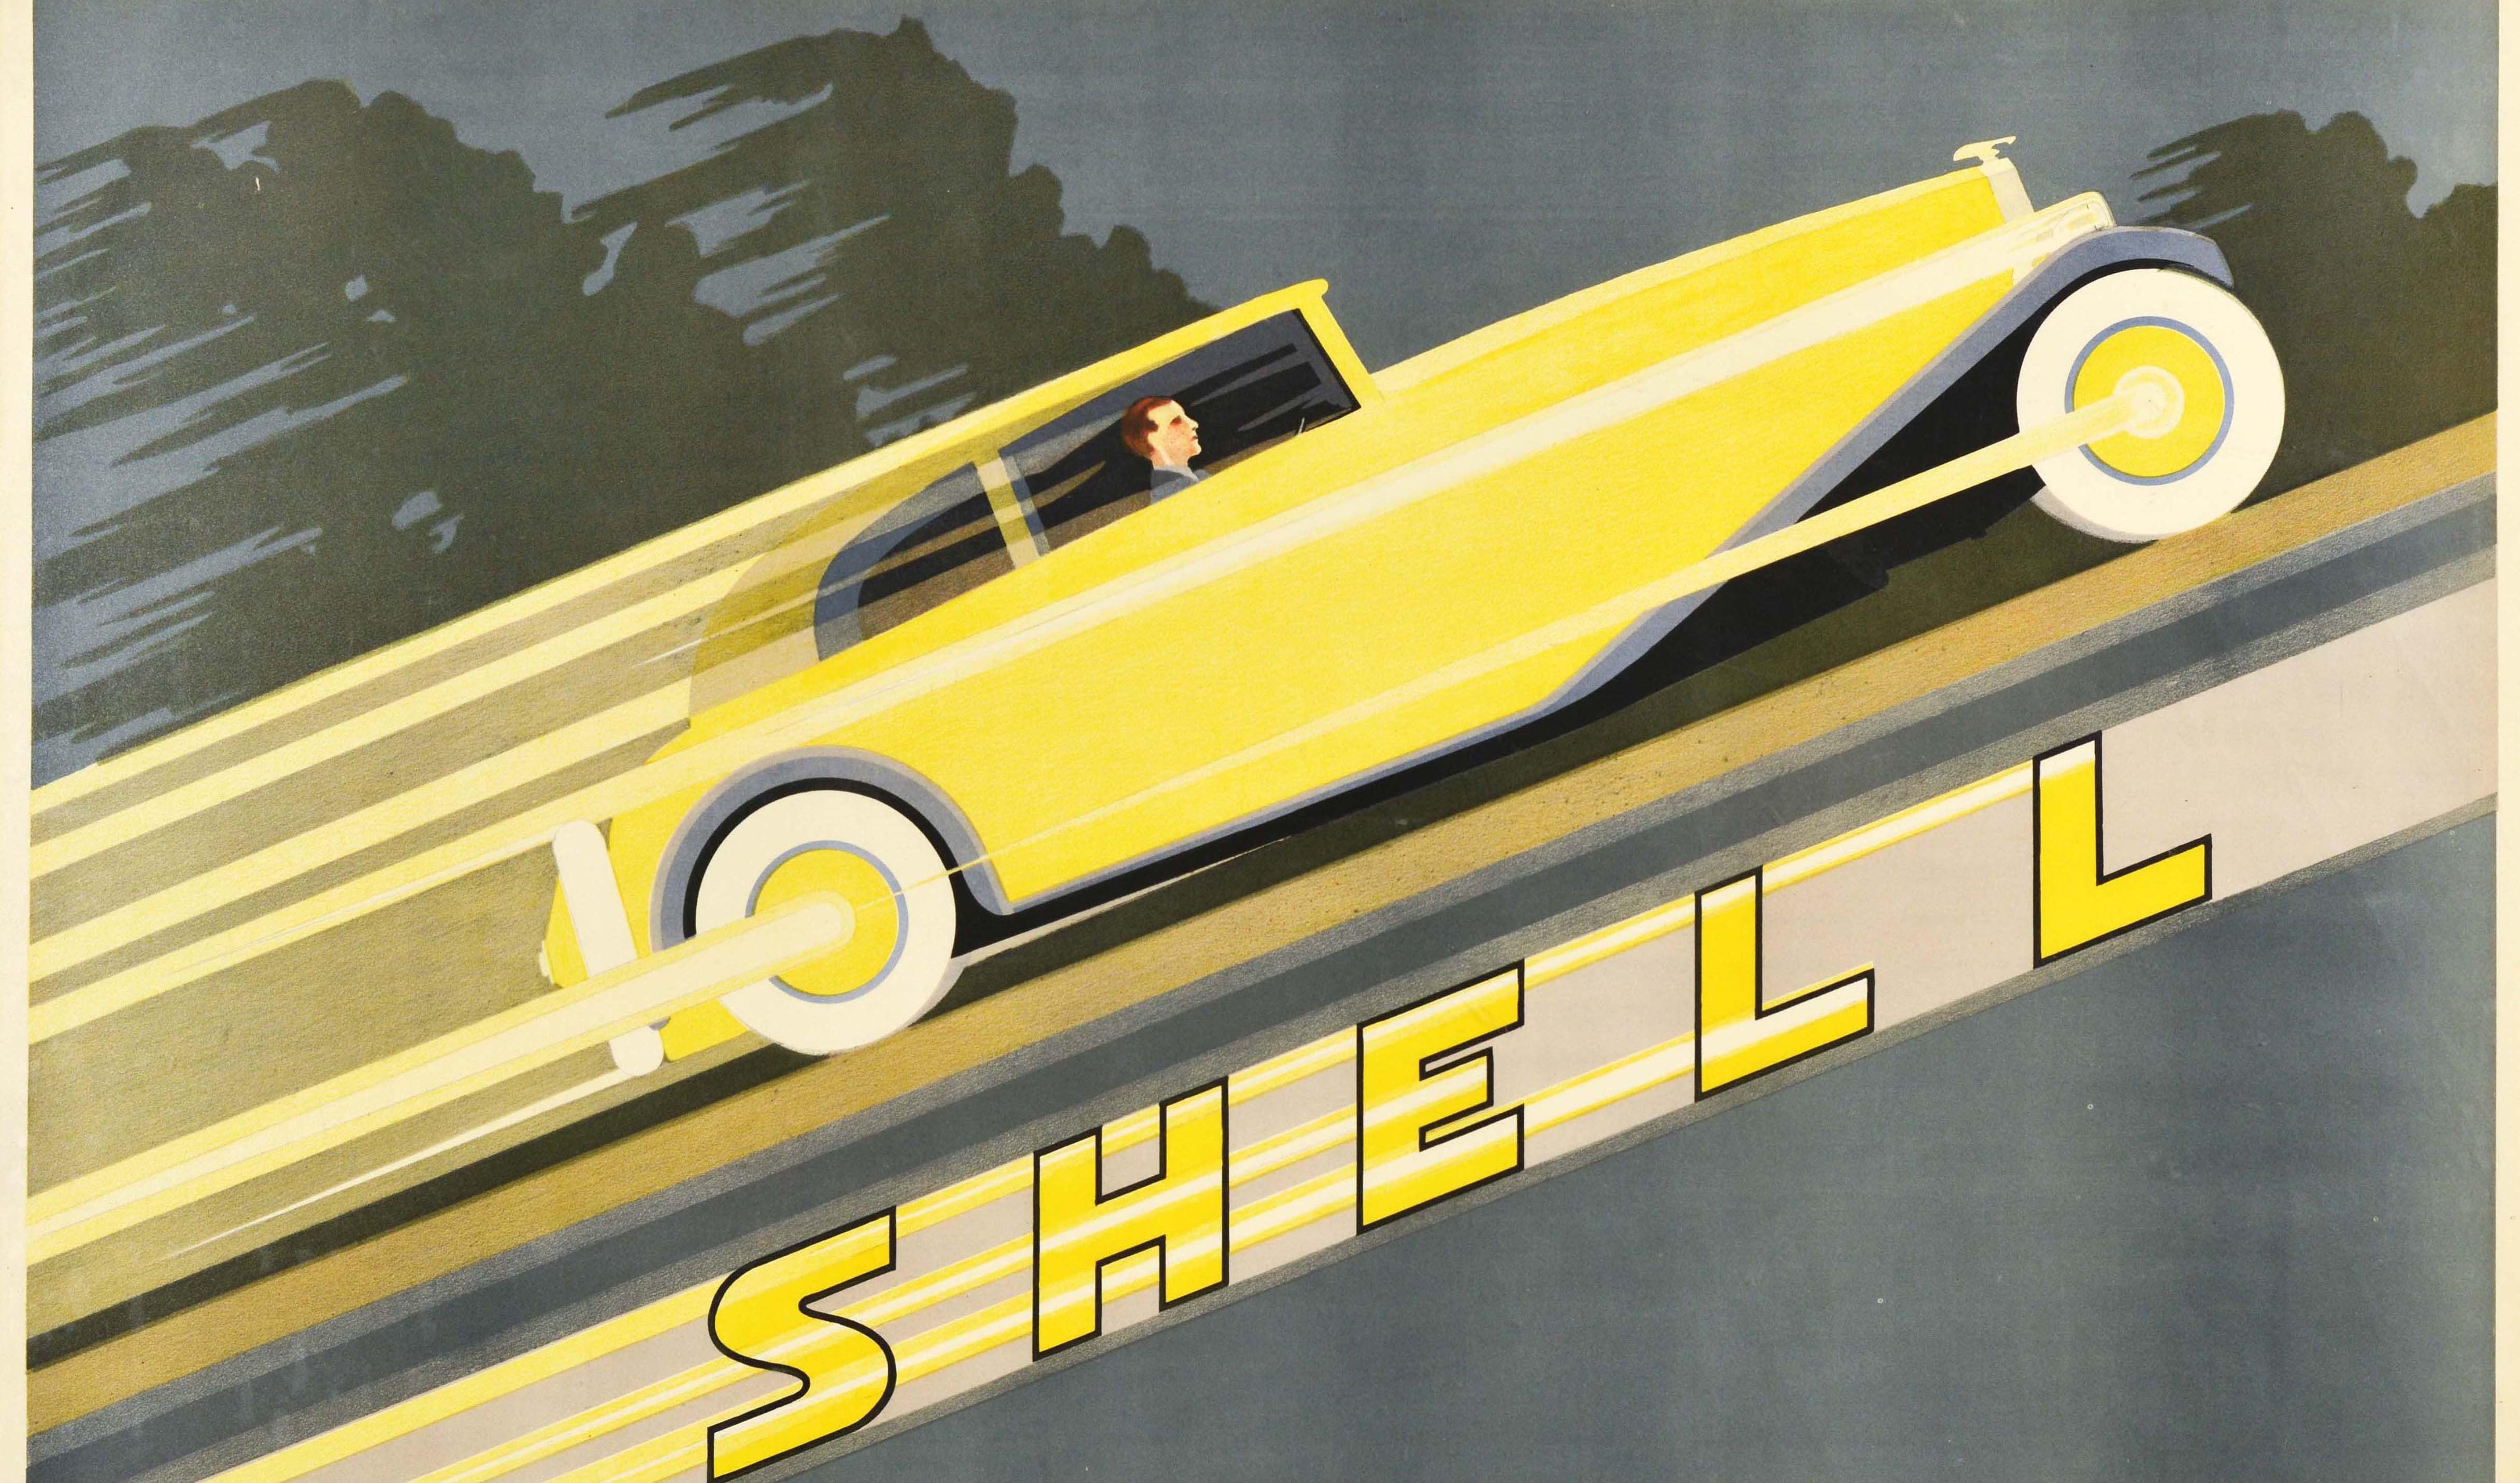 Original vintage advertising poster for Shell's superior quality petrol featuring a stunning Art Deco design of a Classic car in yellow driving at speed diagonally up a hill across the image with trees in the background and the stylised lettering in